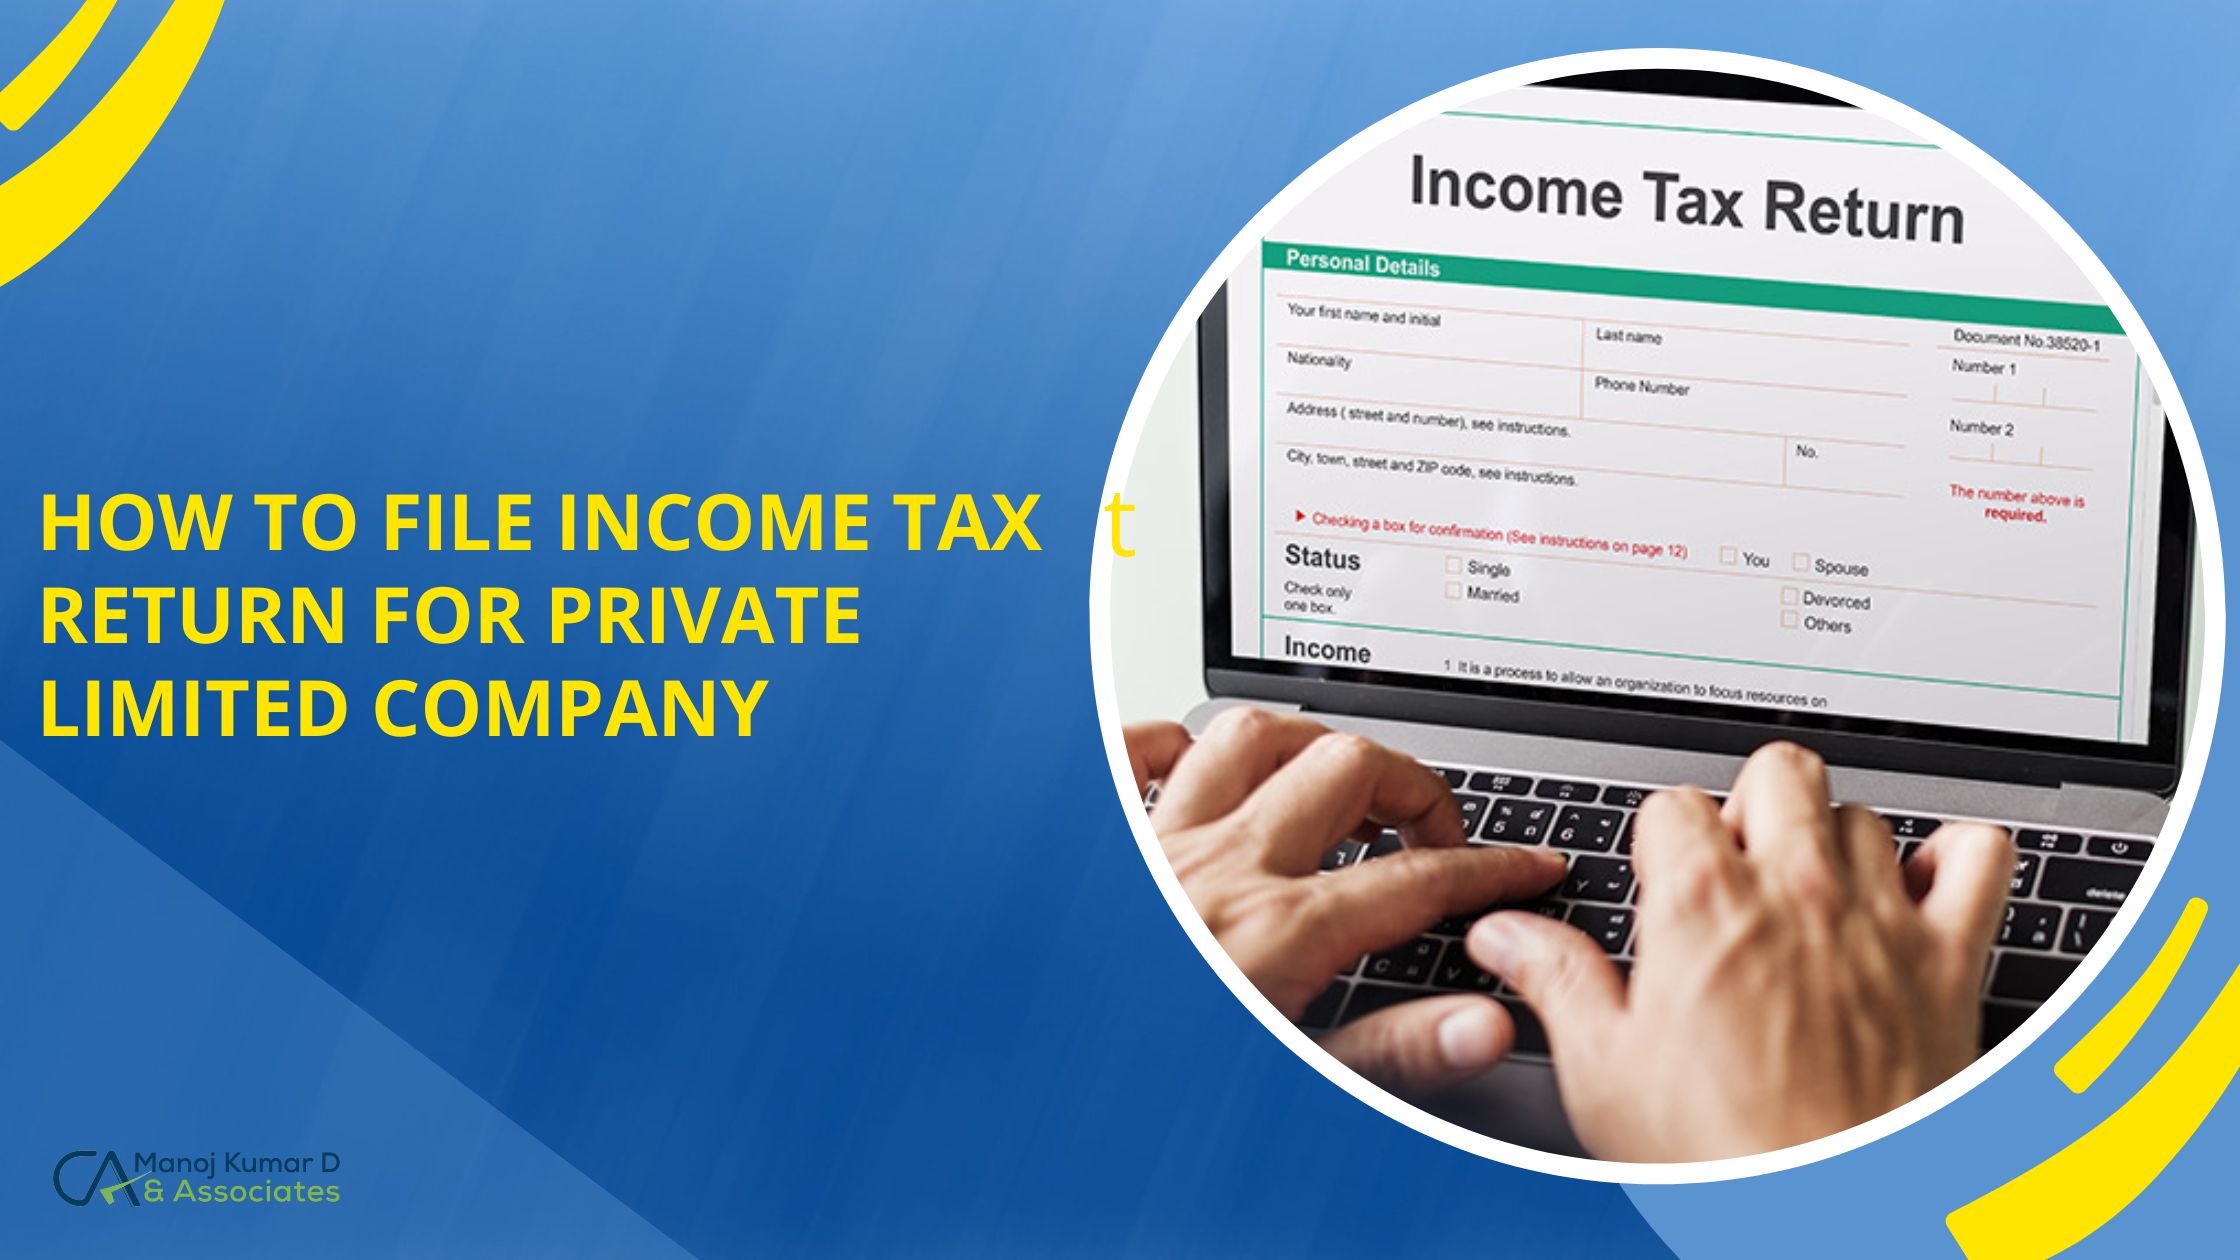 A Comprehensive Guide to Submit ITR Form for Private Limited Company